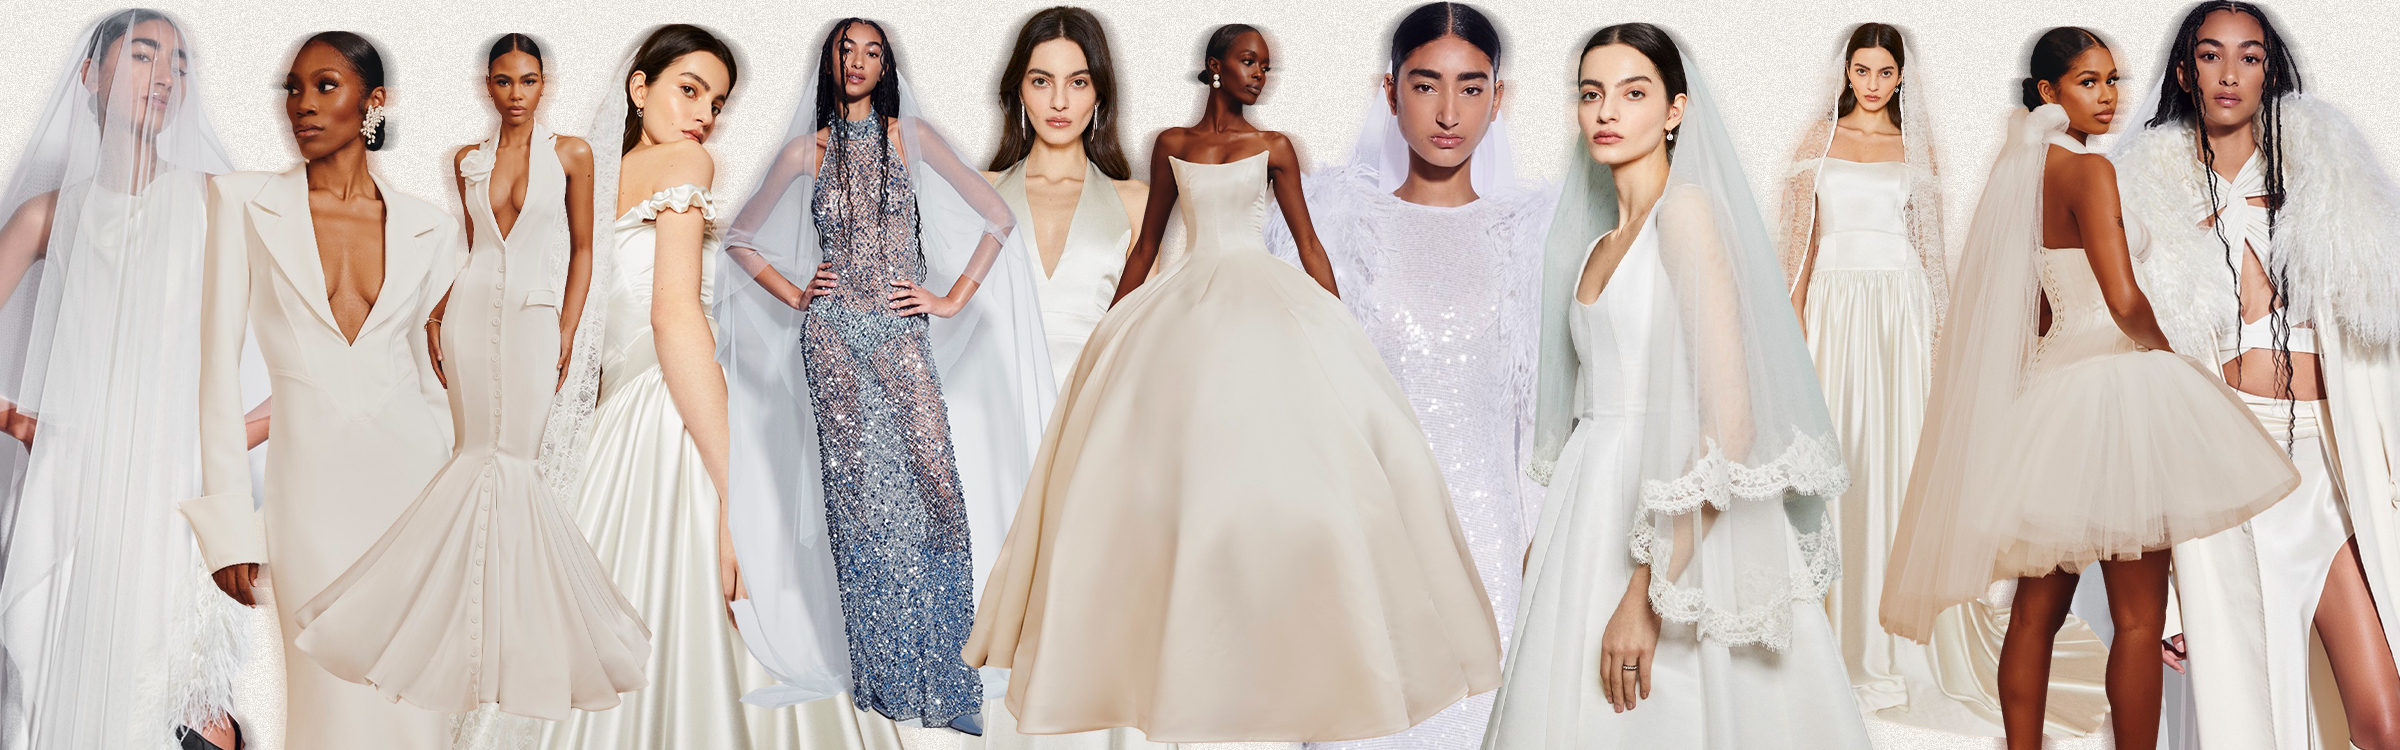 Bridalwear Is Booming, and These 3 Fashion Brands Want a Piece